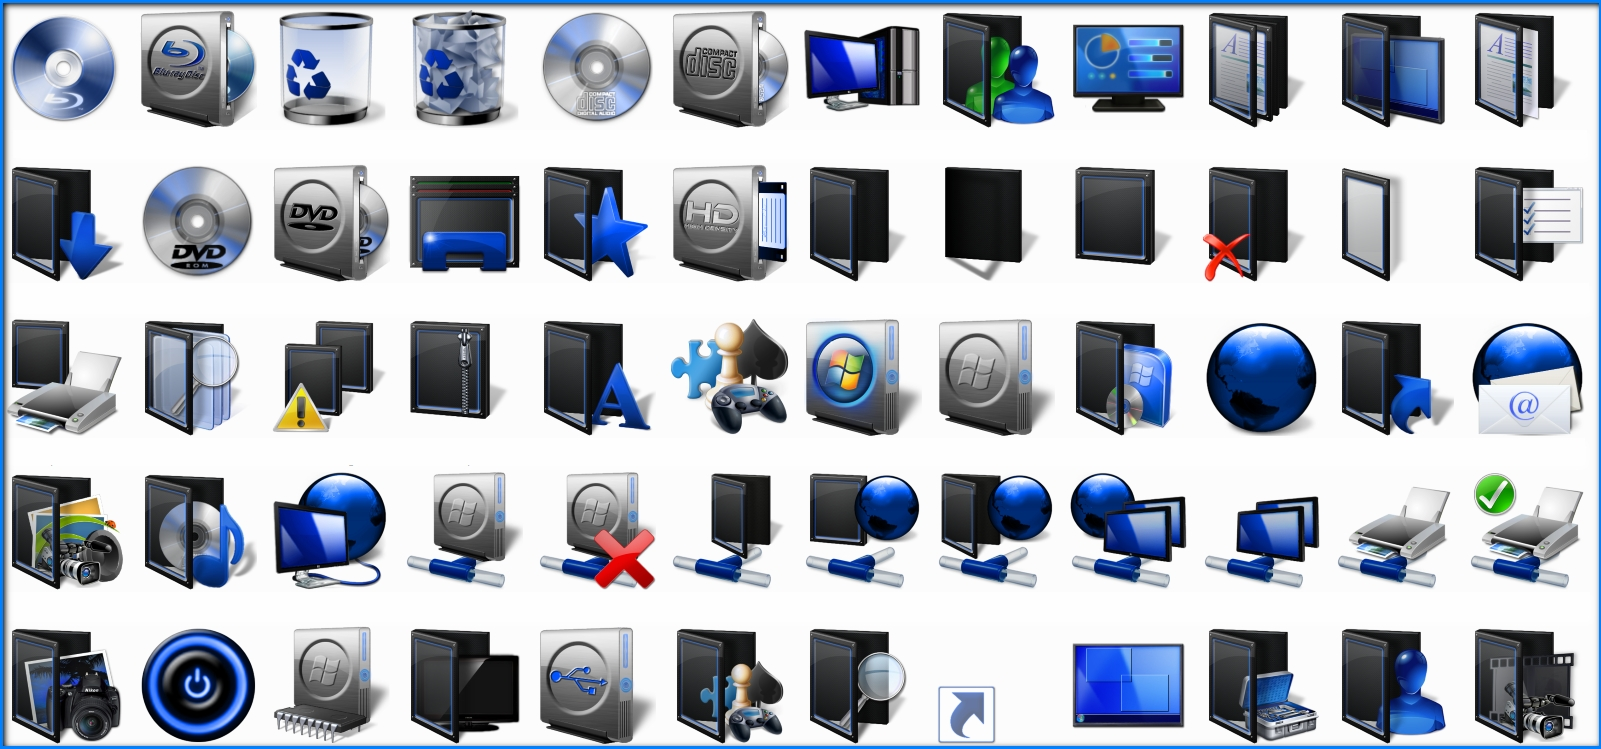 14 3d Drive Icons Windows 7 Images Windows Hard Drive Icon Free